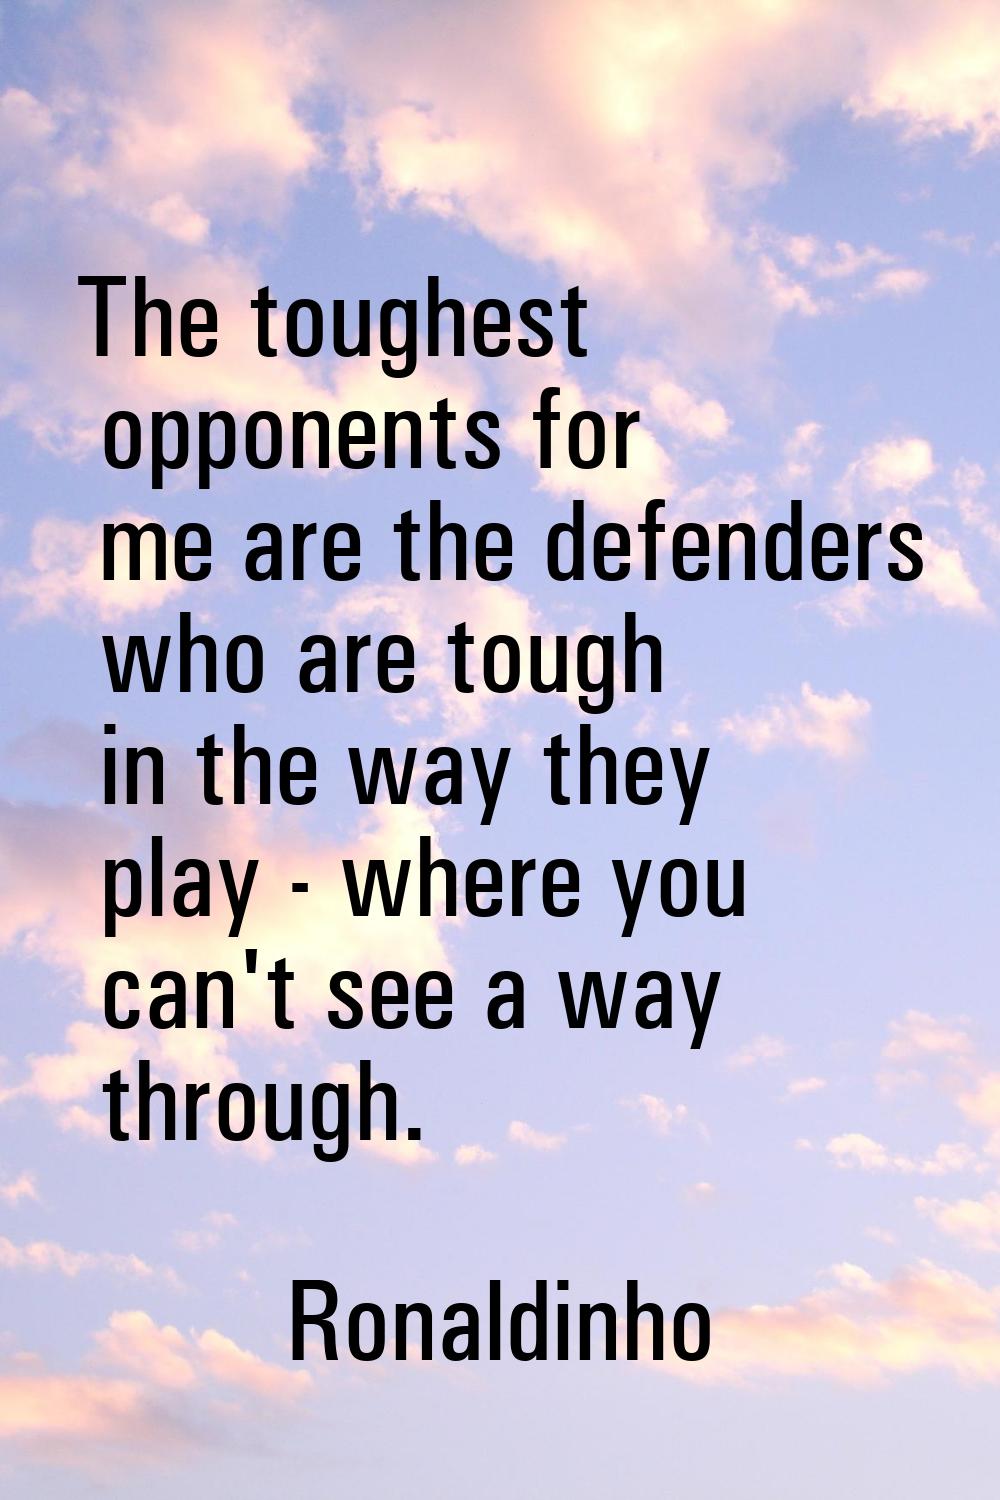 The toughest opponents for me are the defenders who are tough in the way they play - where you can'